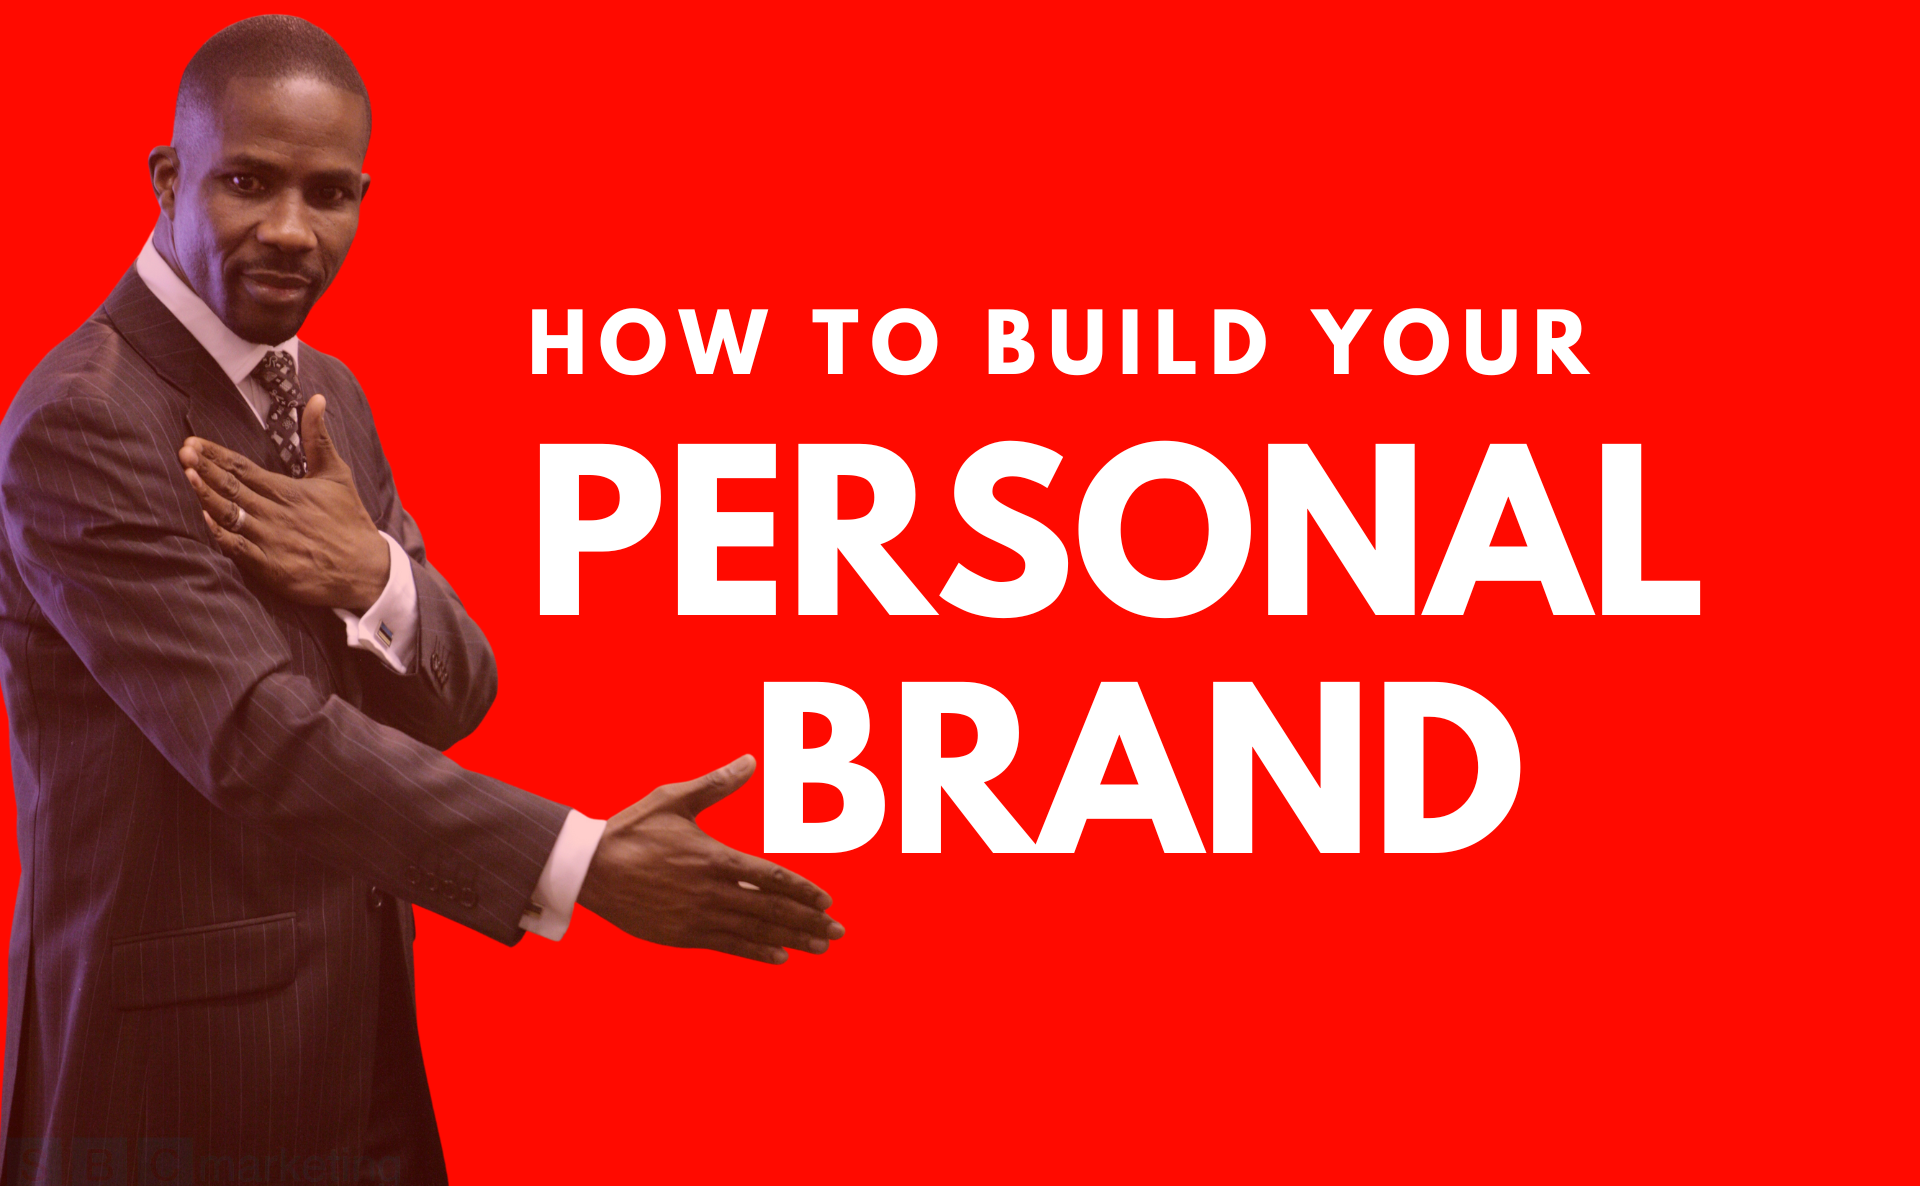 How to build your personal brand - SBC Marketing London